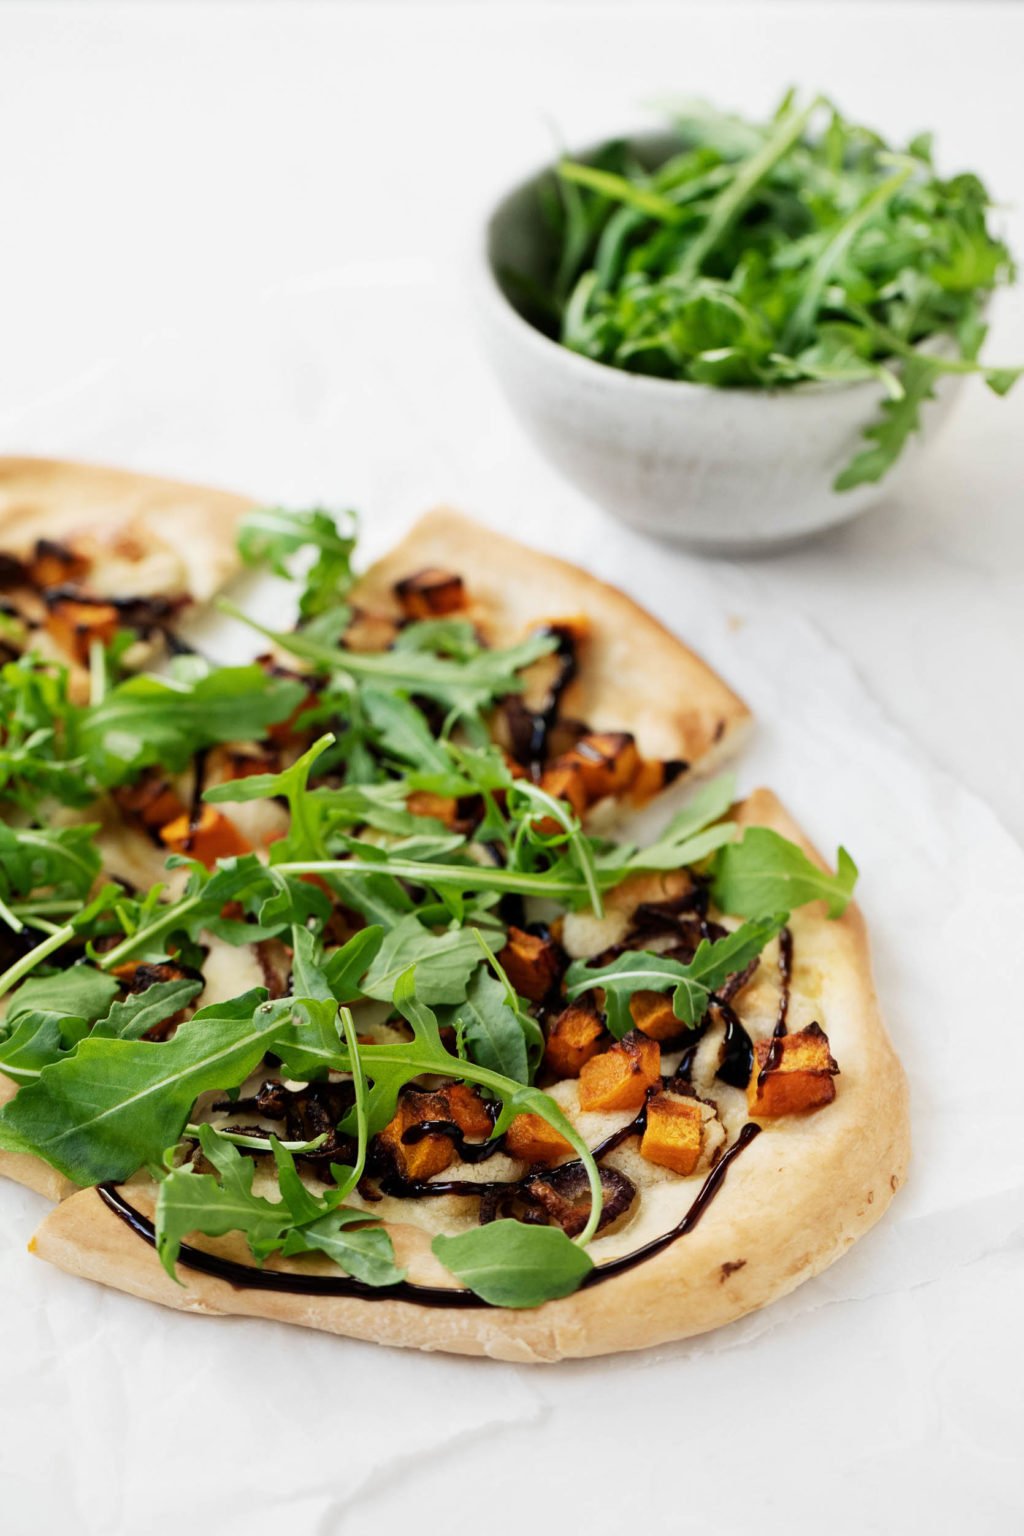 A vegan pizza with roasted butternut squash, red onions, and cashew cheese, topped with bright green arugula and drizzled with balsamic vinegar.